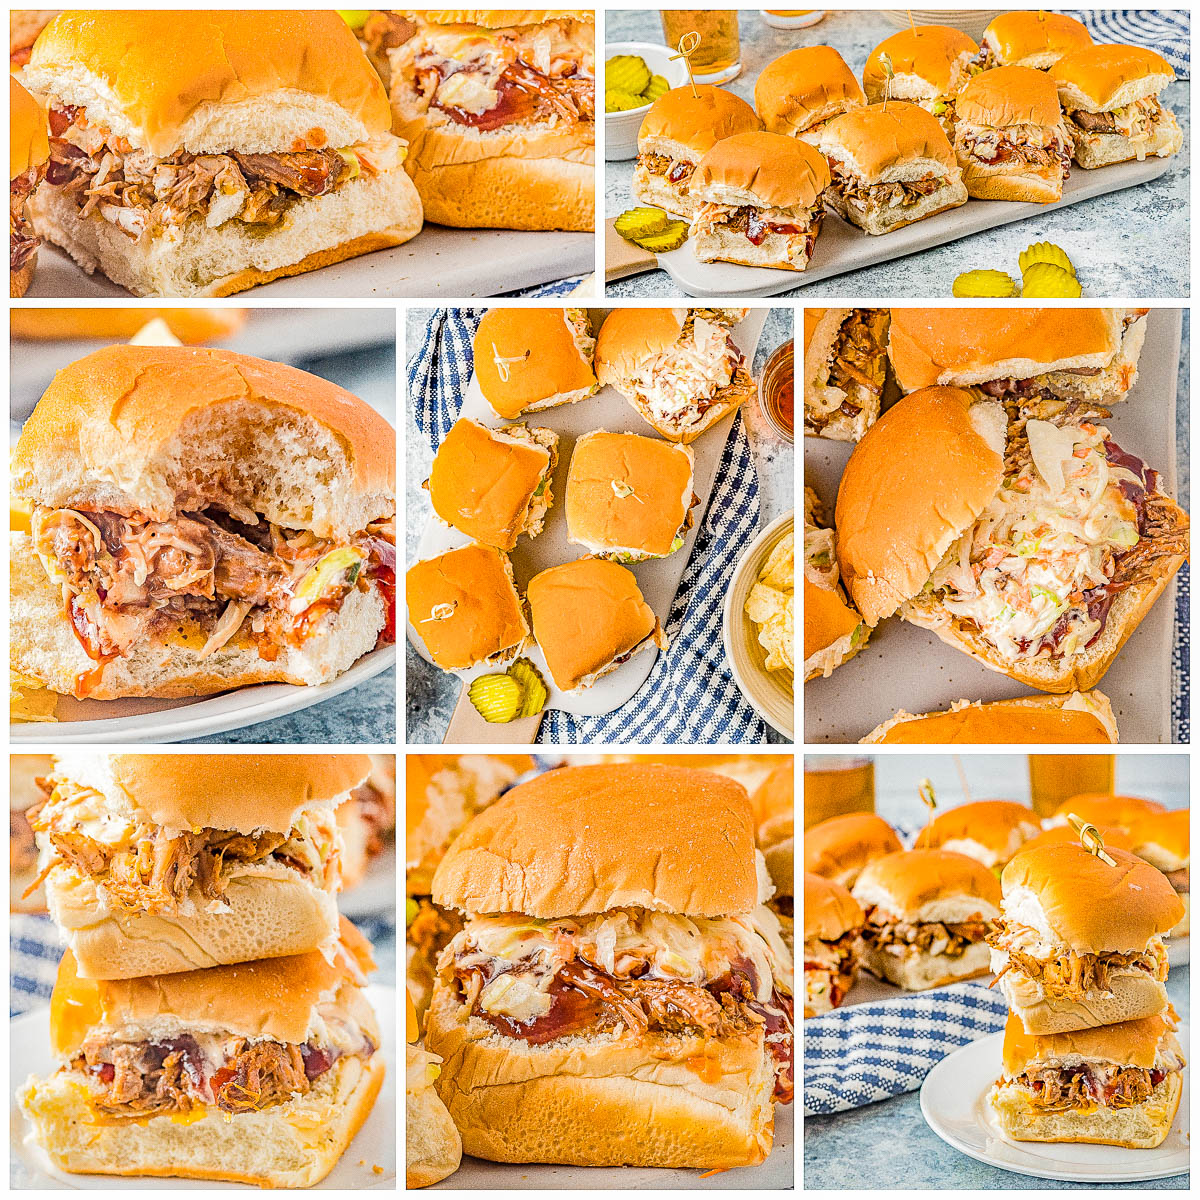 Easy Pulled Pork Sliders - Moist and tender pulled pork, topped with barbecue sauce and coleslaw, and sandwiched between soft Hawaiian rolls! Everyone LOVES these EASY juicy sliders that are finger lickin' good! PERFECT for game days, casual entertaining, backyard barbecues, graduation and Father's Day celebrations.